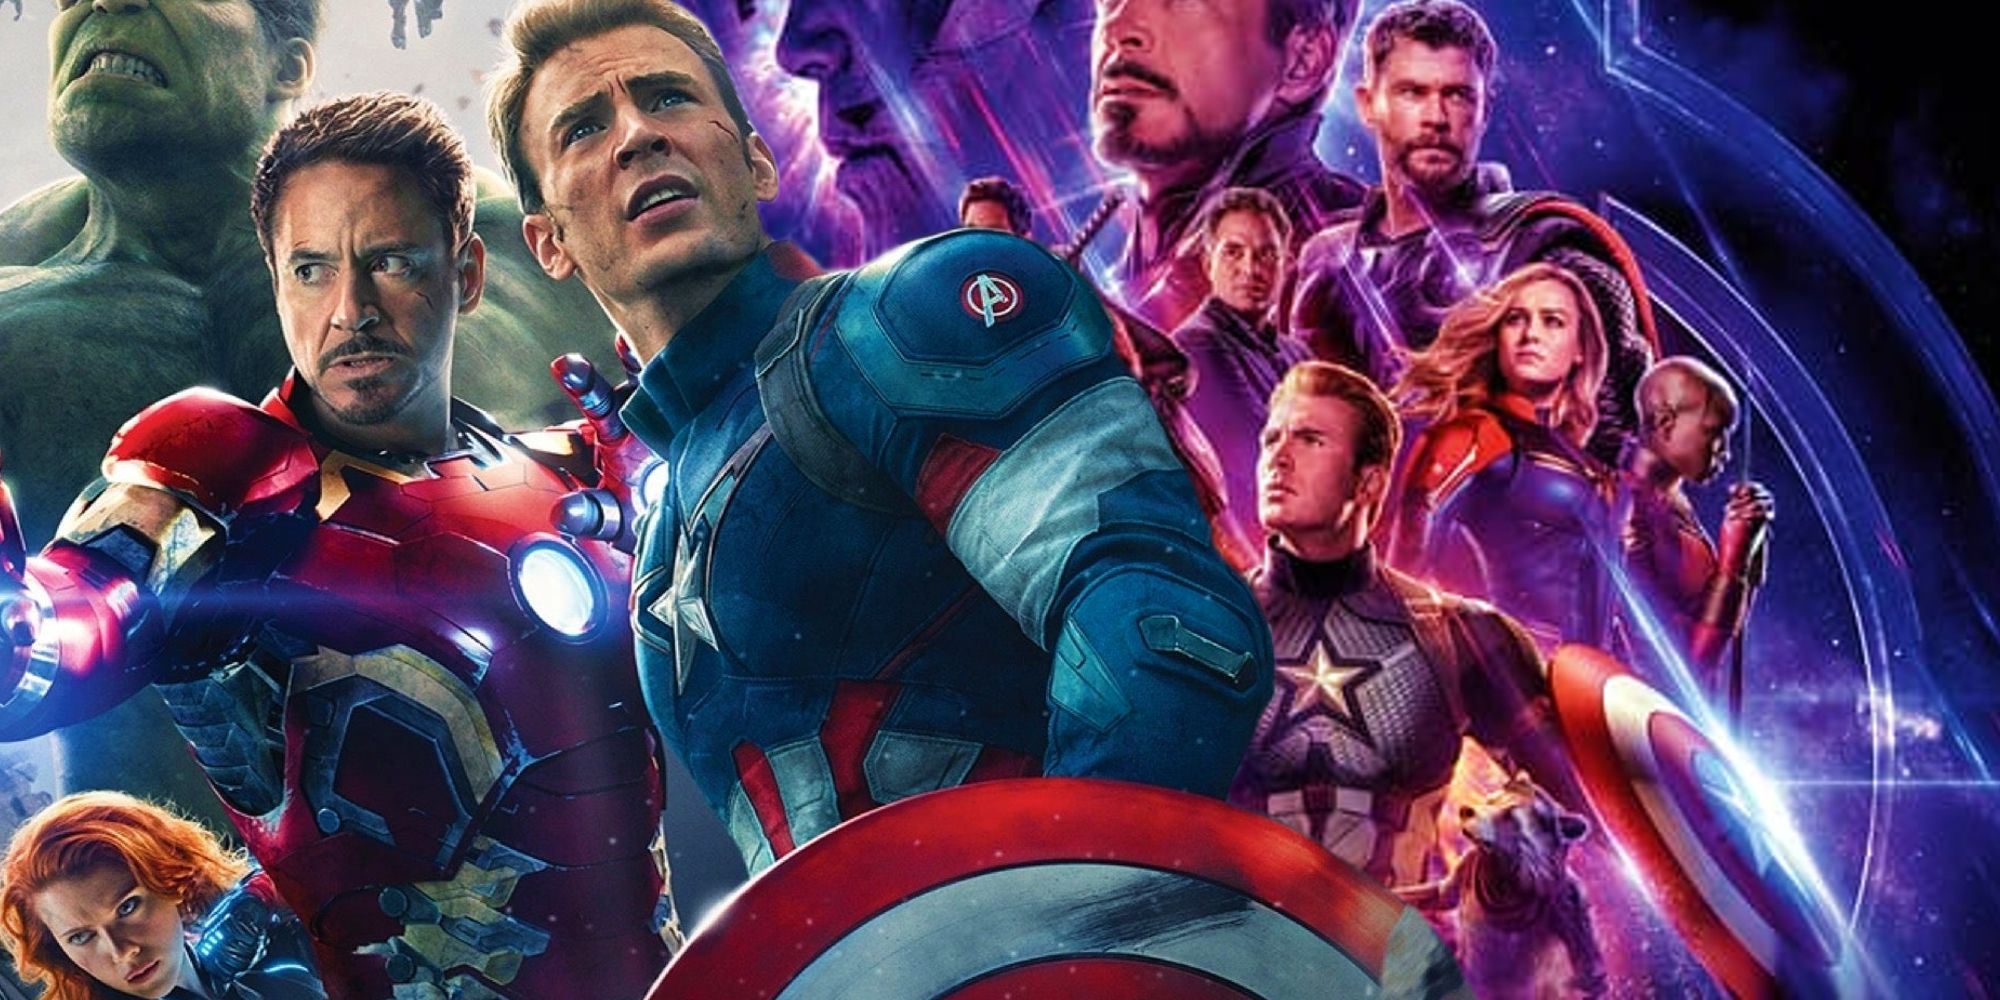 The team from Avengers: Age of Ultron next to the poster for Avengers Endgame